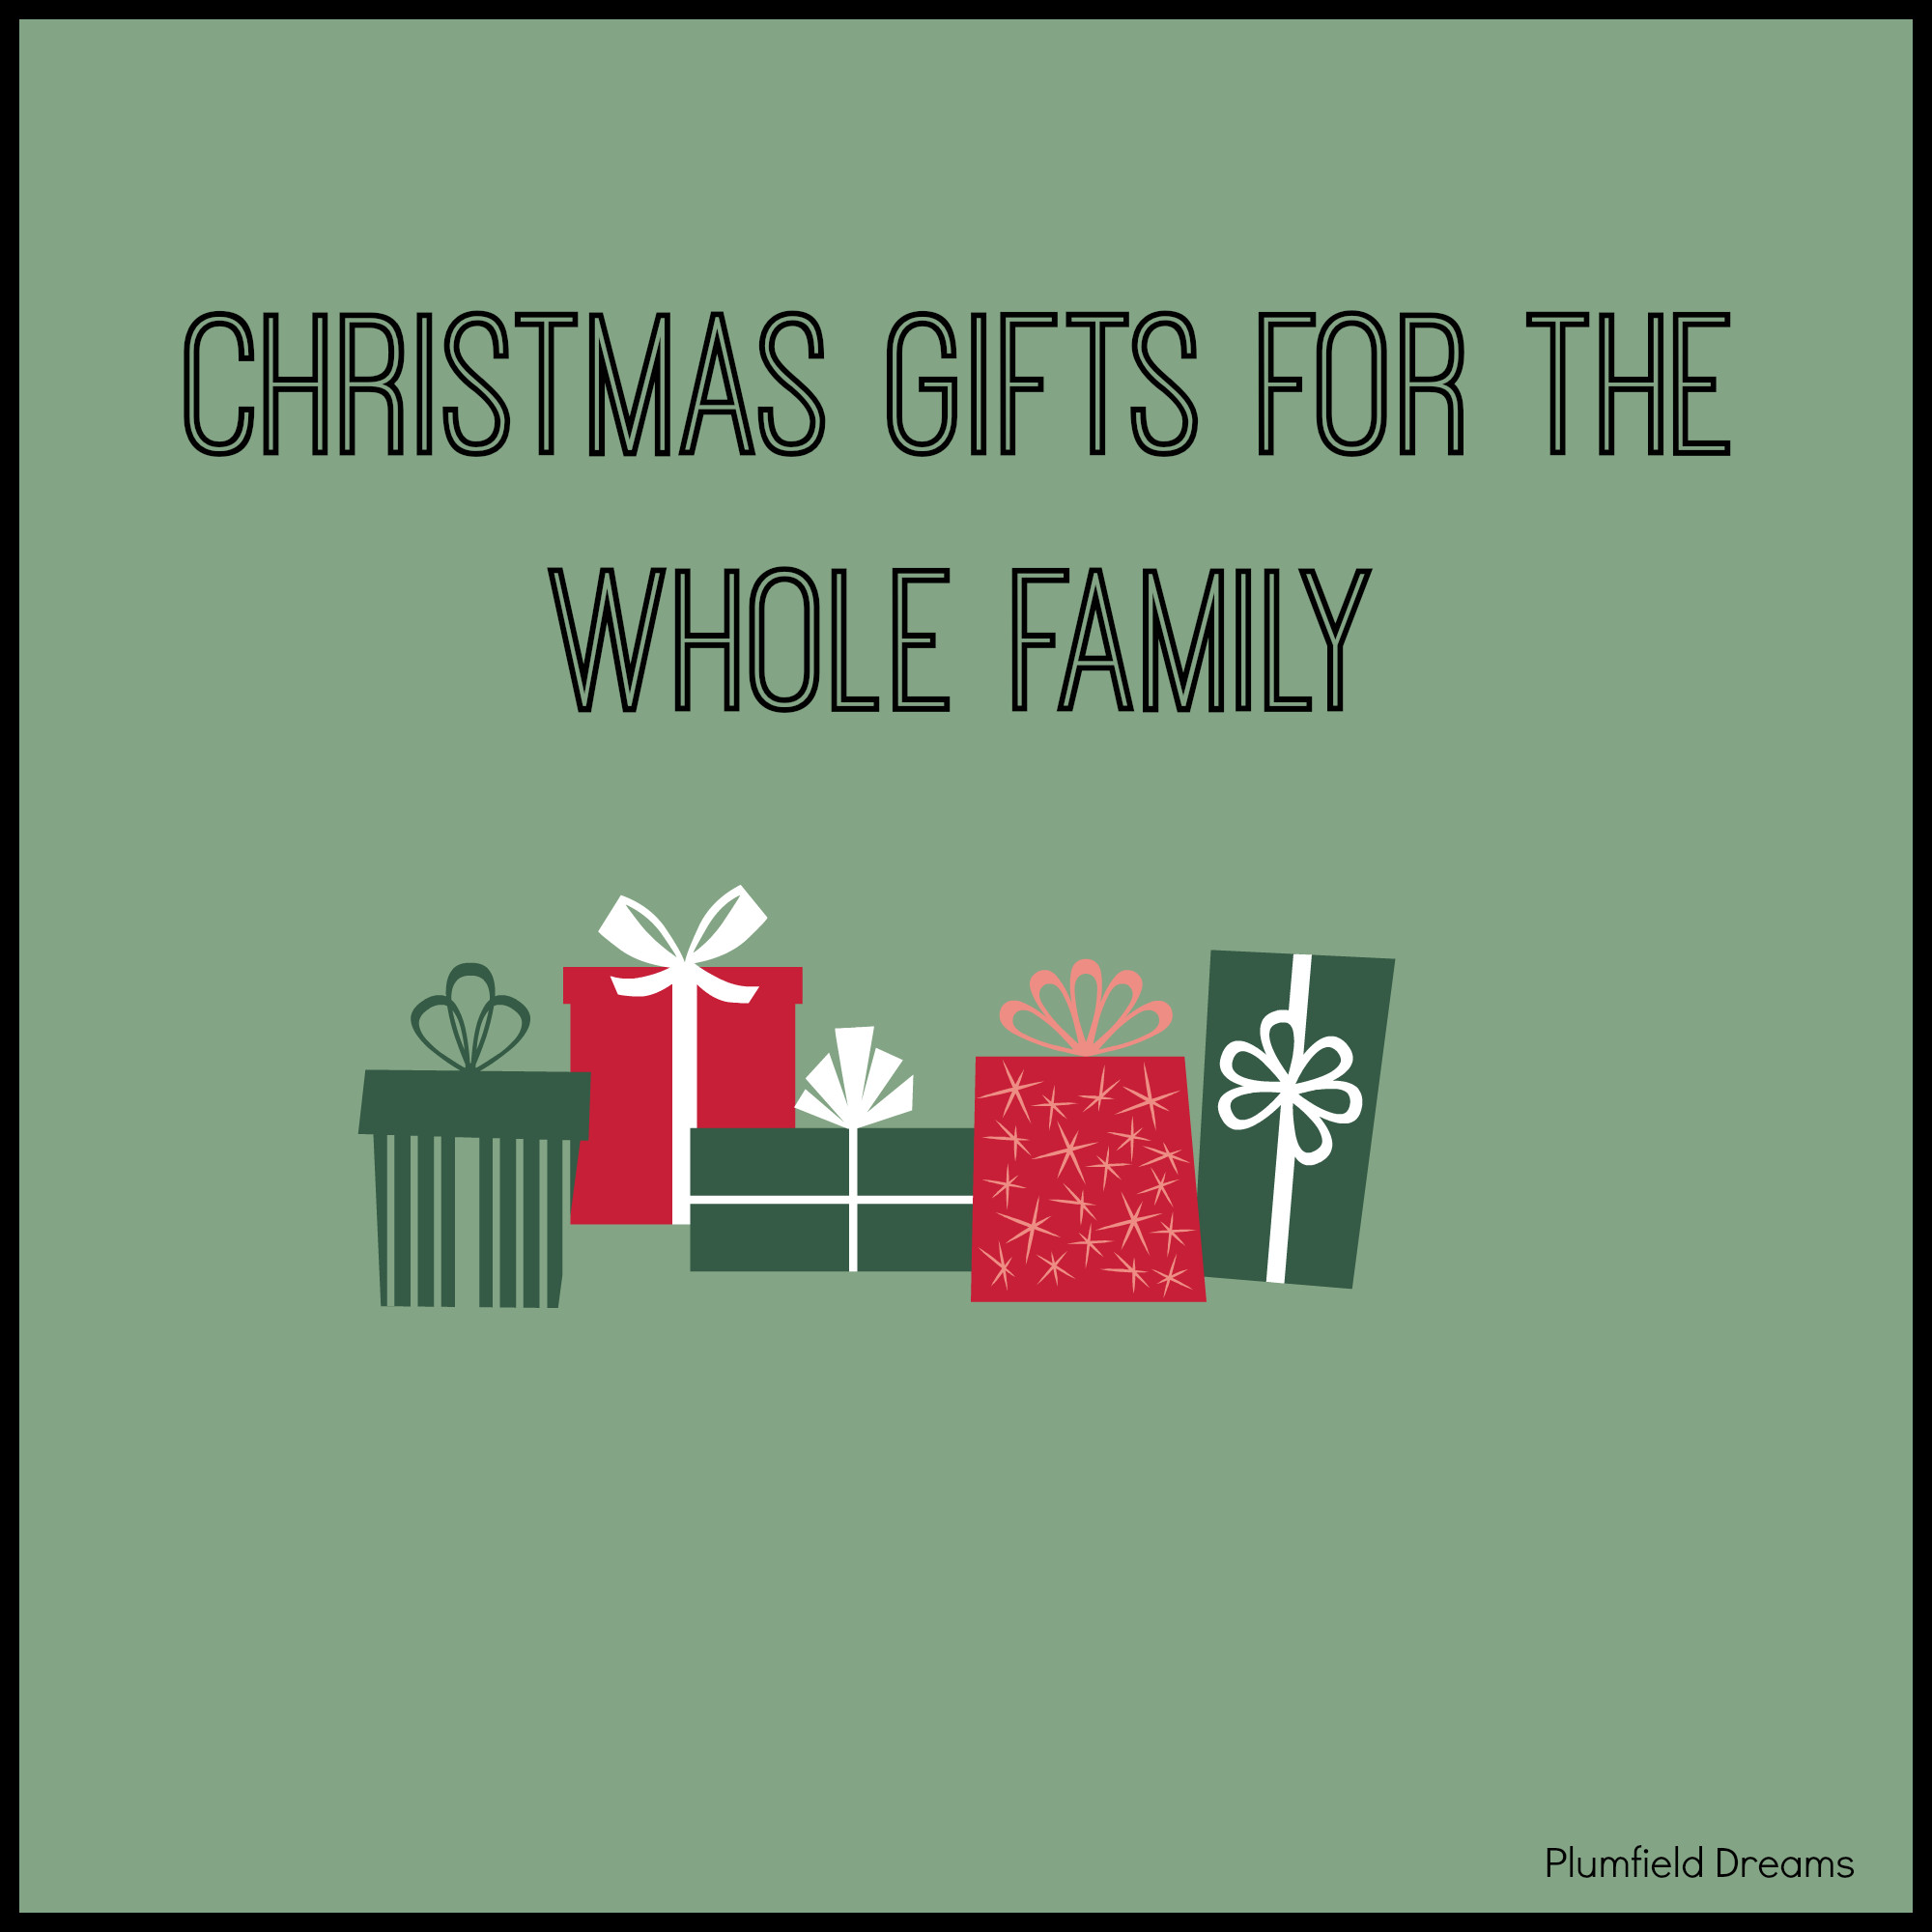 Christmas Gift Ideas For The Whole Family
 Christmas Gifts for the Whole Family Plumfield